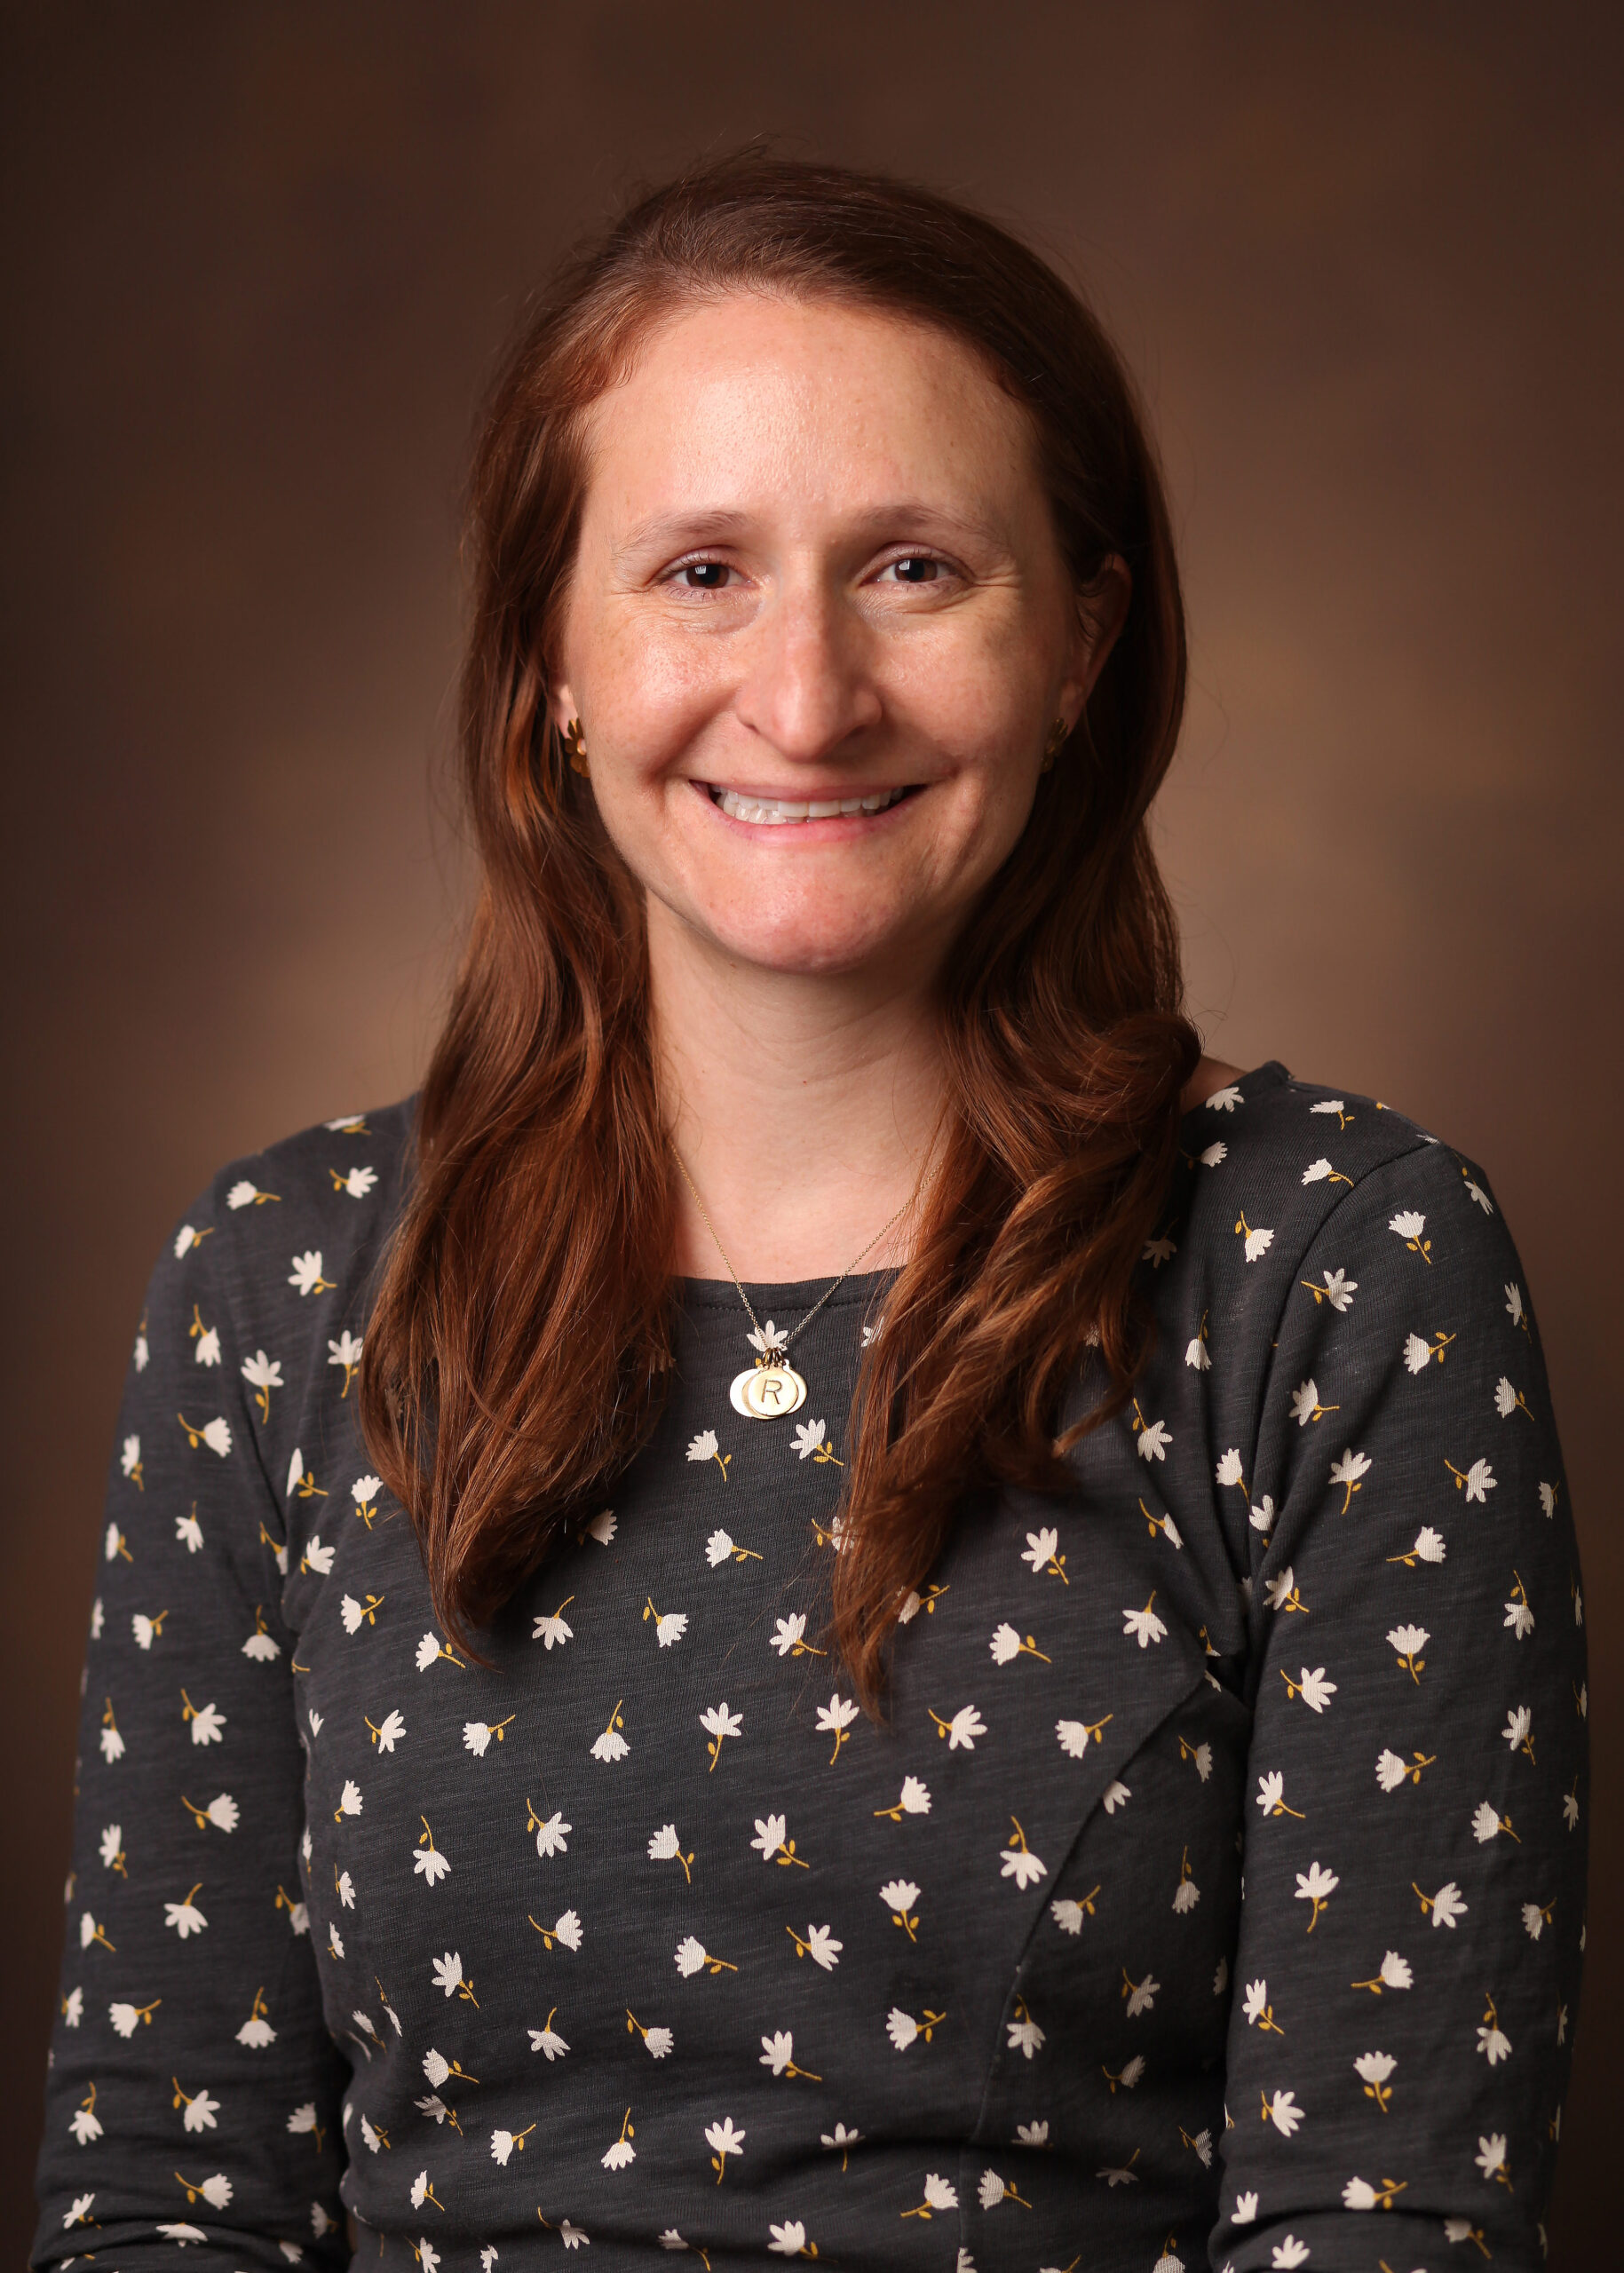 Alison Carroll, MD, a clinical fellow in Pediatric Hospital Medicine, poses for a photo in the Medical Center North photo studio Monday, March 30, 2020 at Vanderbilt University Medical Center in Nashville, Tennessee.